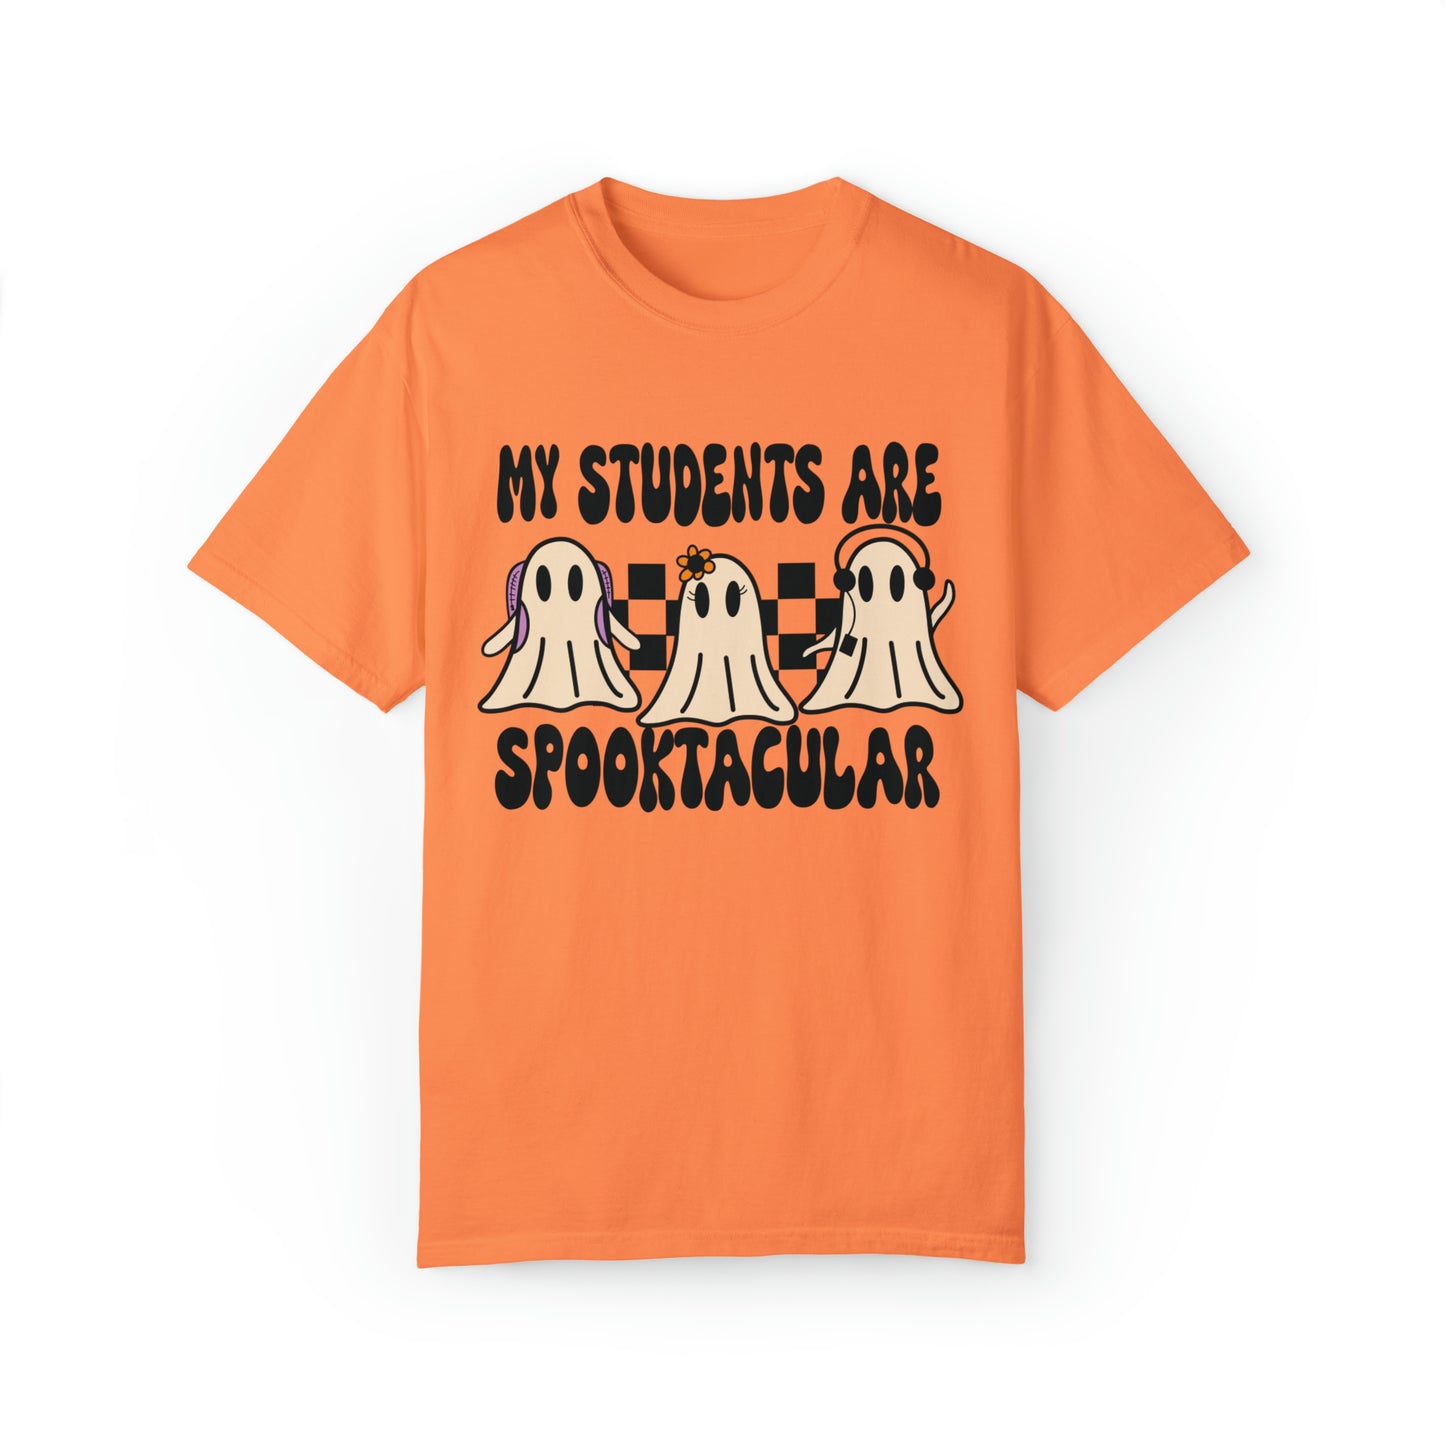 My Students are Spooktacular Comfort Colors Short Sleeve Tee